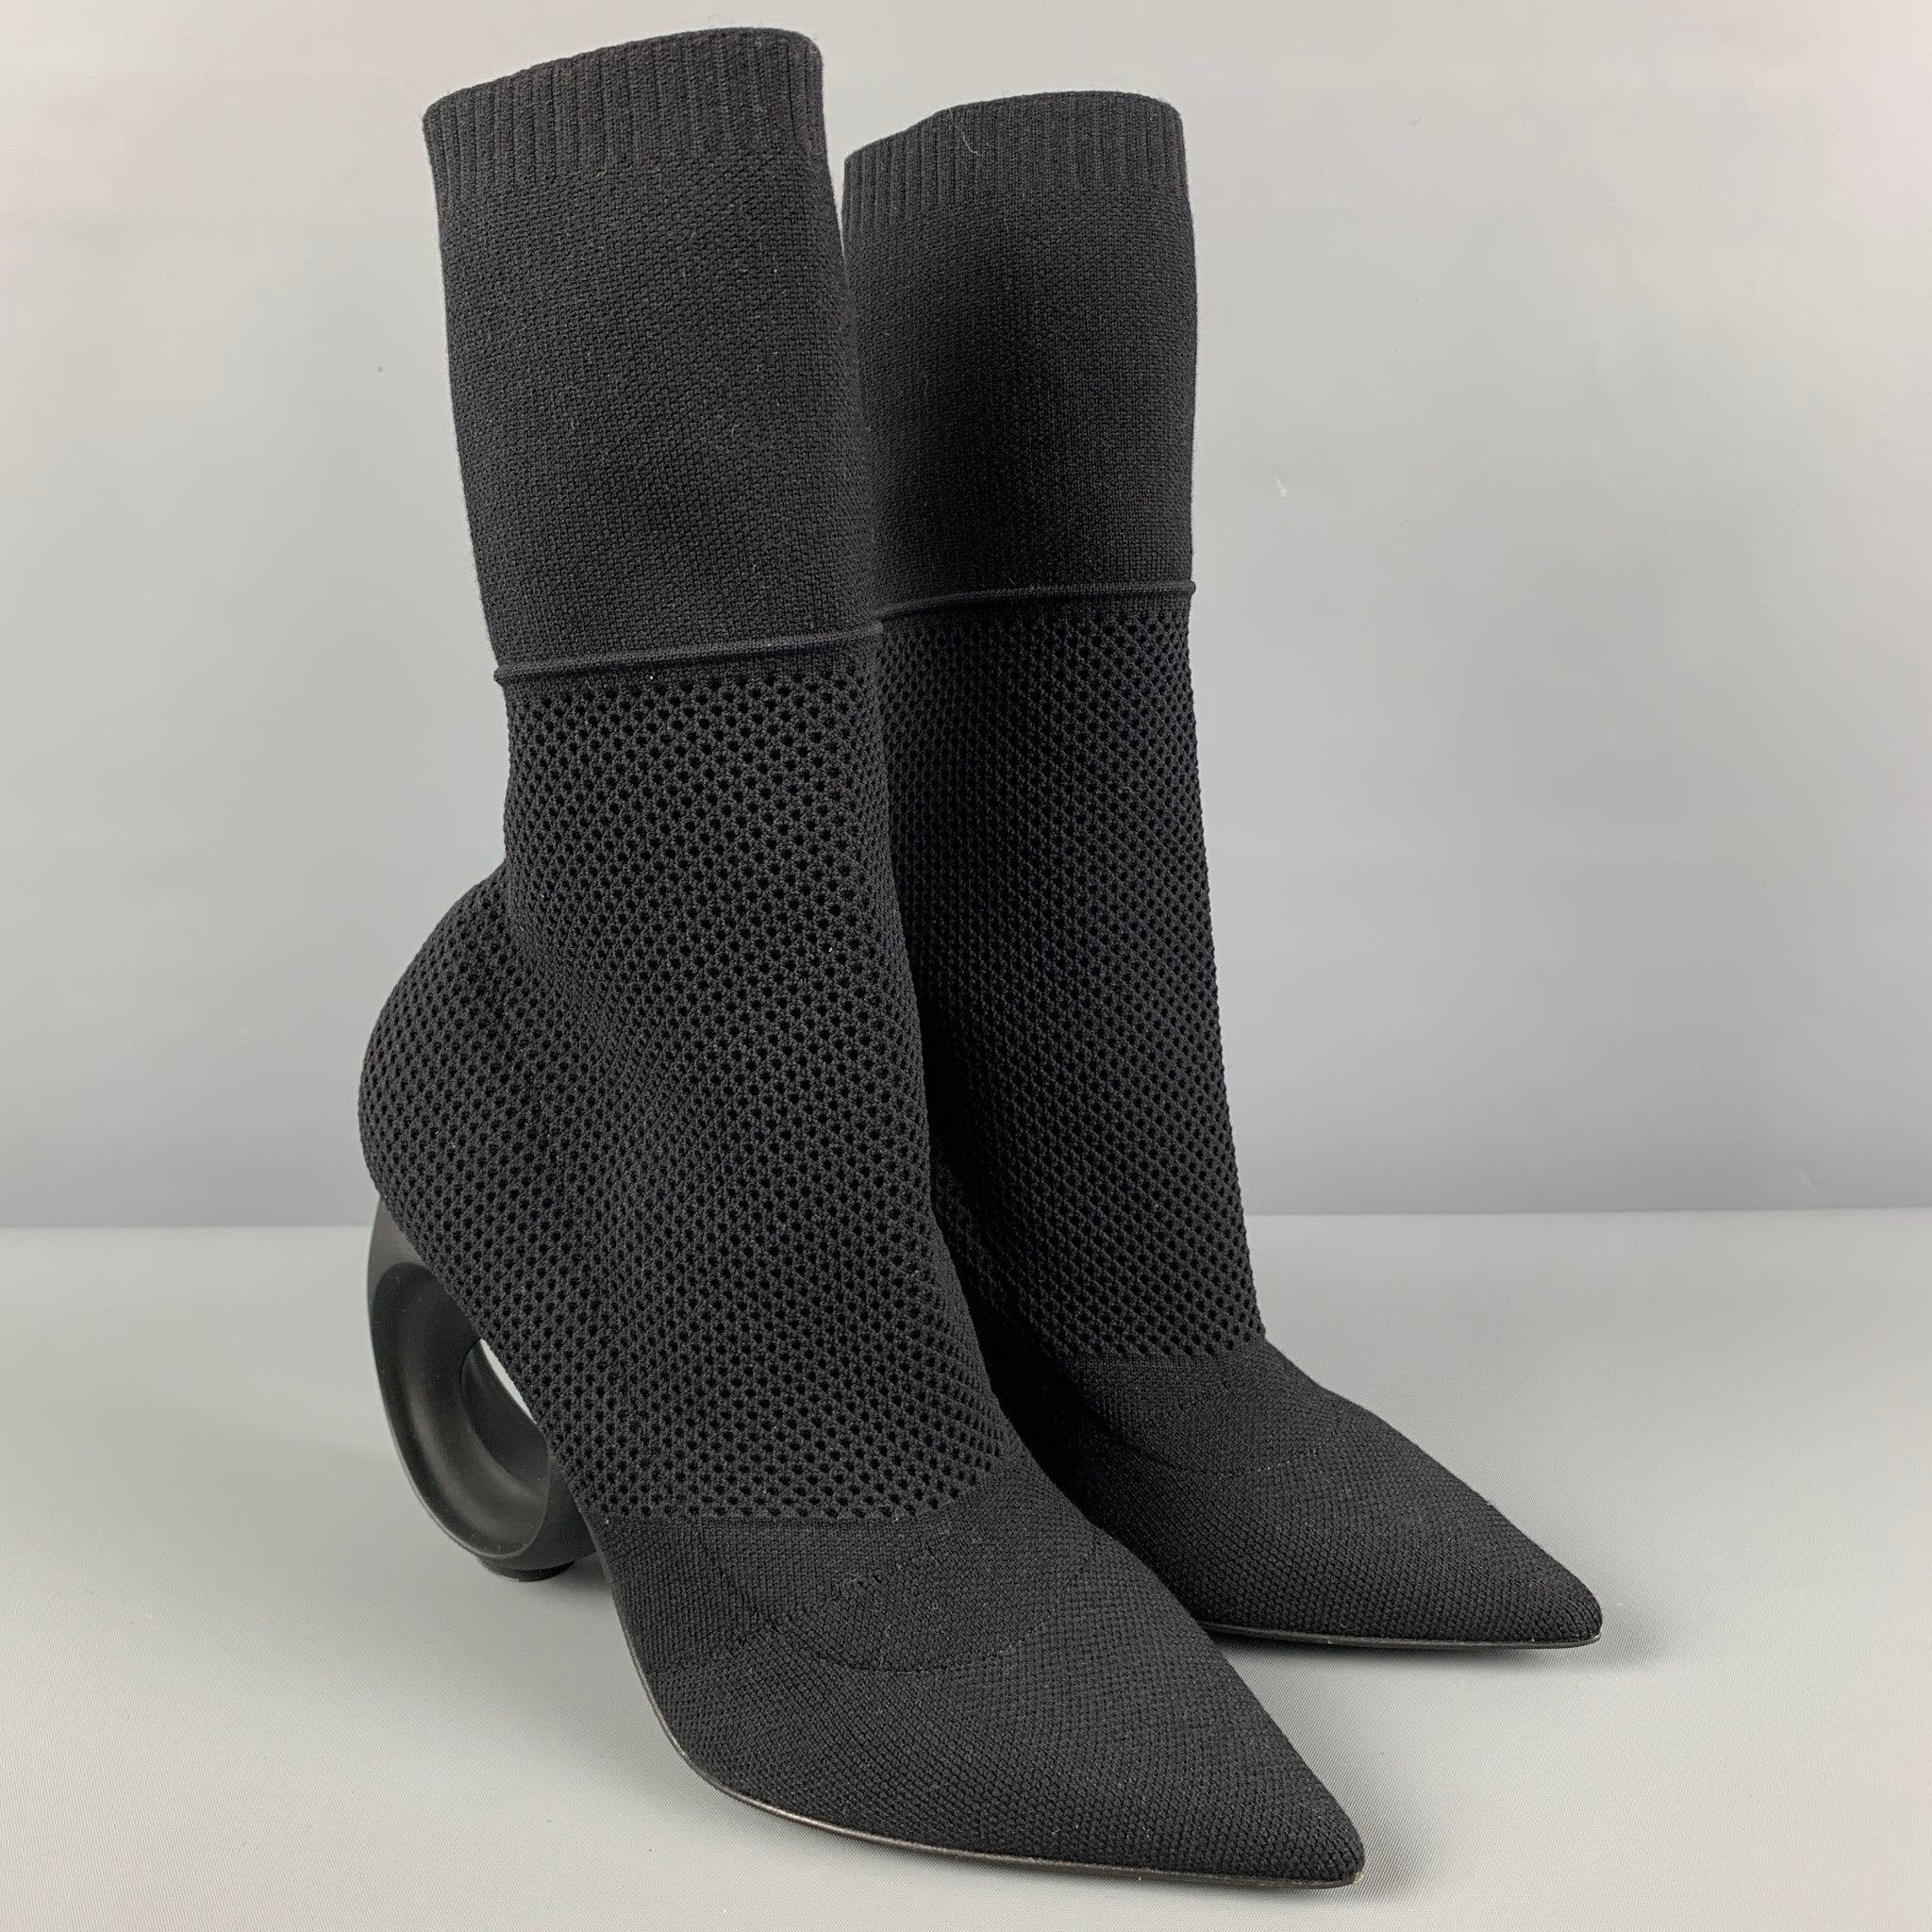 BURBERRY boots comes in a black knitted nylon featuring a slip on style, pointed toe, and a chunky circular heel design. Made in Italy. New with Tags. 

Marked:   38 

Measurements: 
  Length:
8.5 inches  Width: 3.25 inches  Height:
9 inches  Heel: